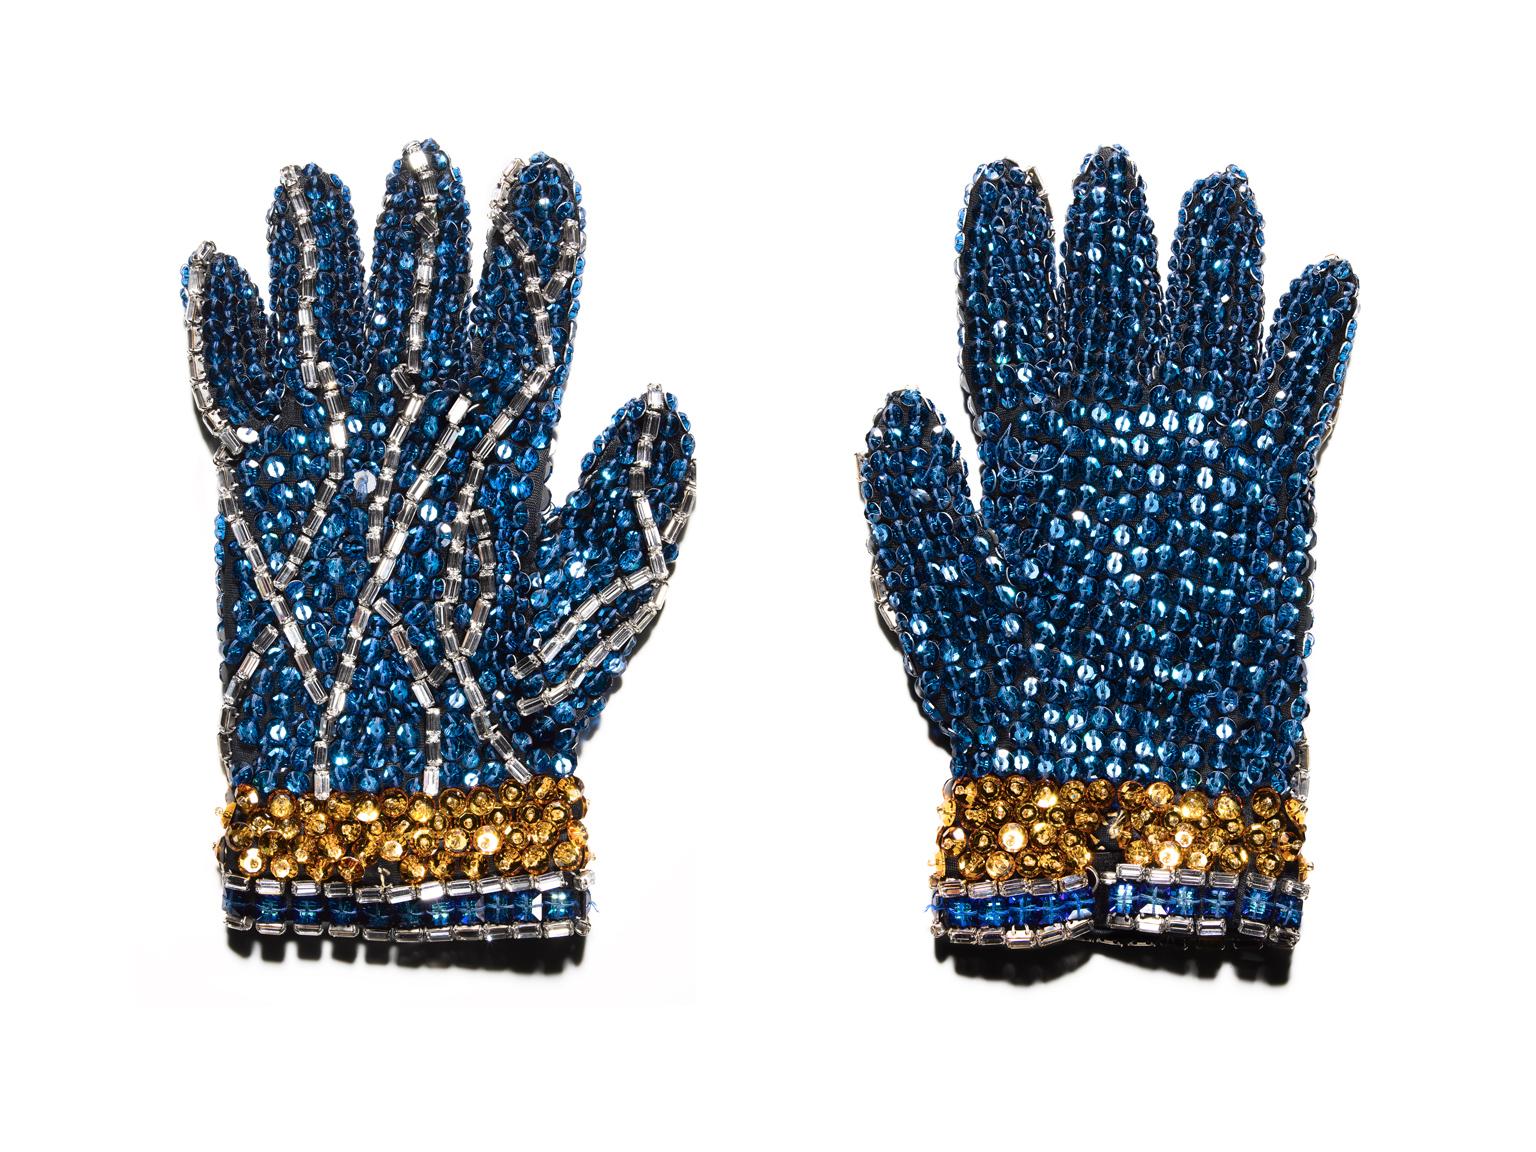 Blue Glove ( Michael Jackson ) - large format iconic still life photograph - Contemporary Print by Tom Schierlitz